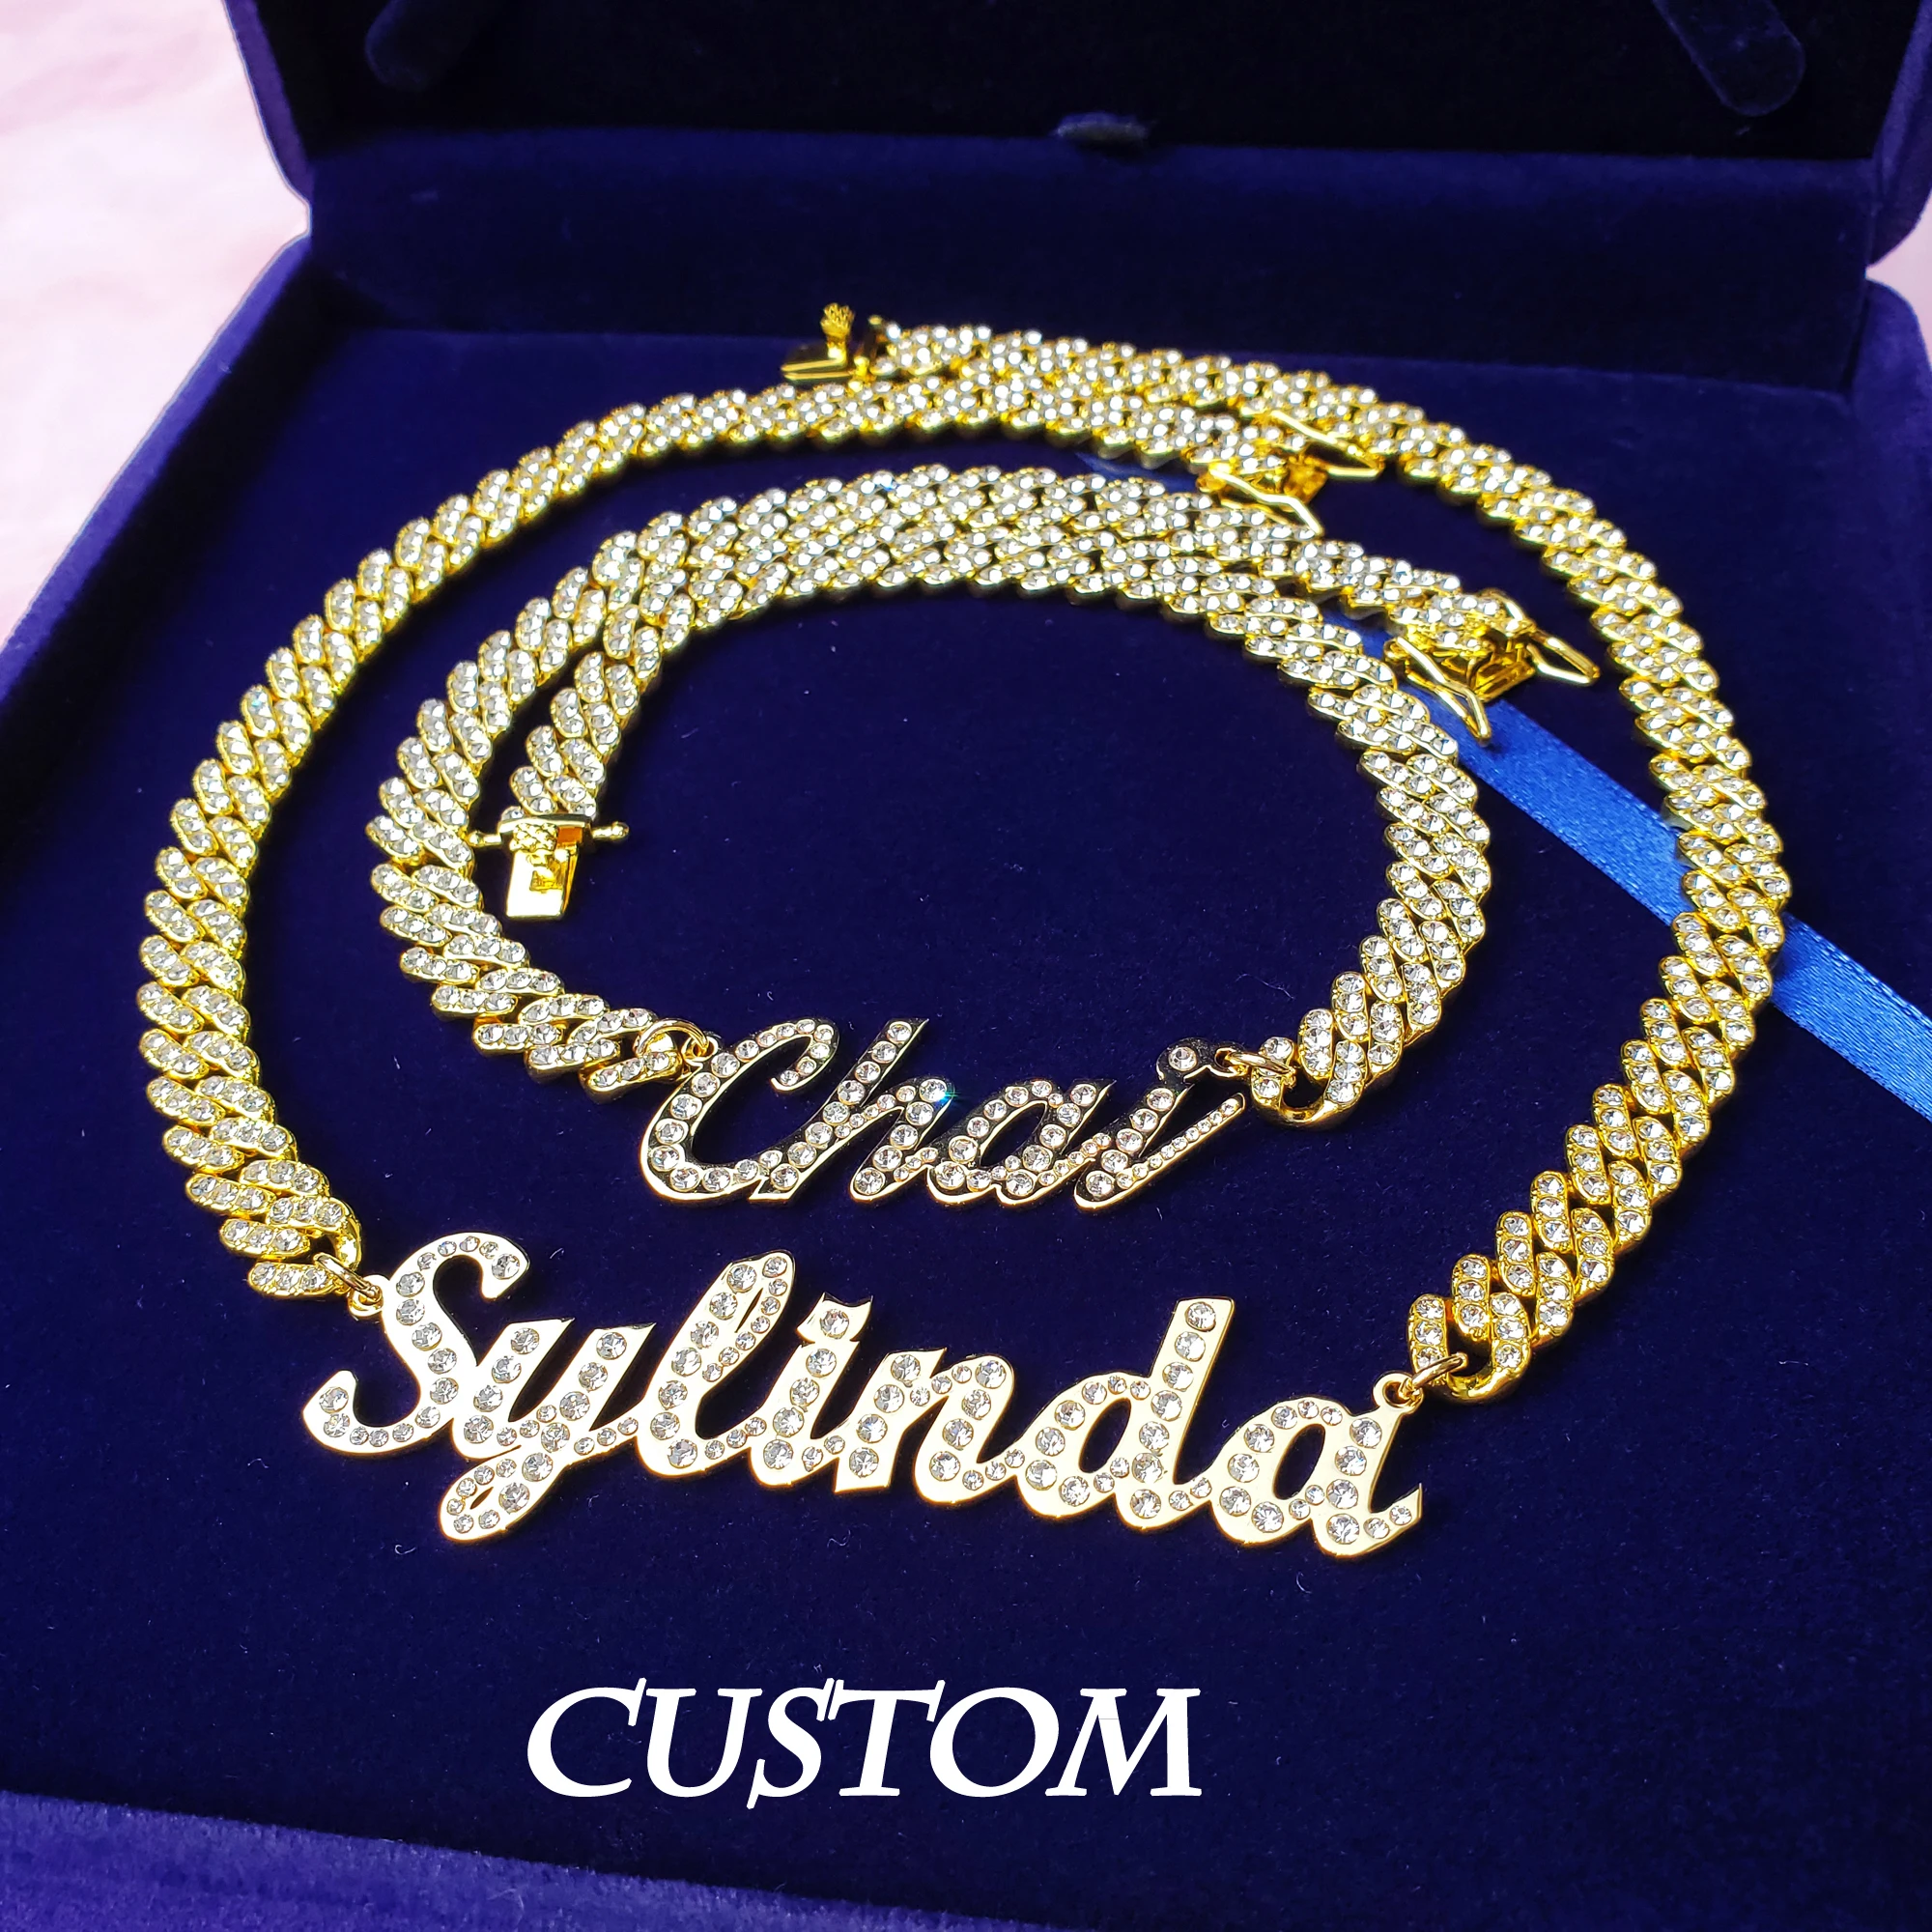 Personalized Name Necklace Stainless Steel with Rhinestone Cuban Chain Choker Necklace Perfect Gift for Her Part Prom Jewelry janevini shinning beading bridal dress belts with crystals rhinestone bridesmaid sash womens belt wedding evening prom gown belt